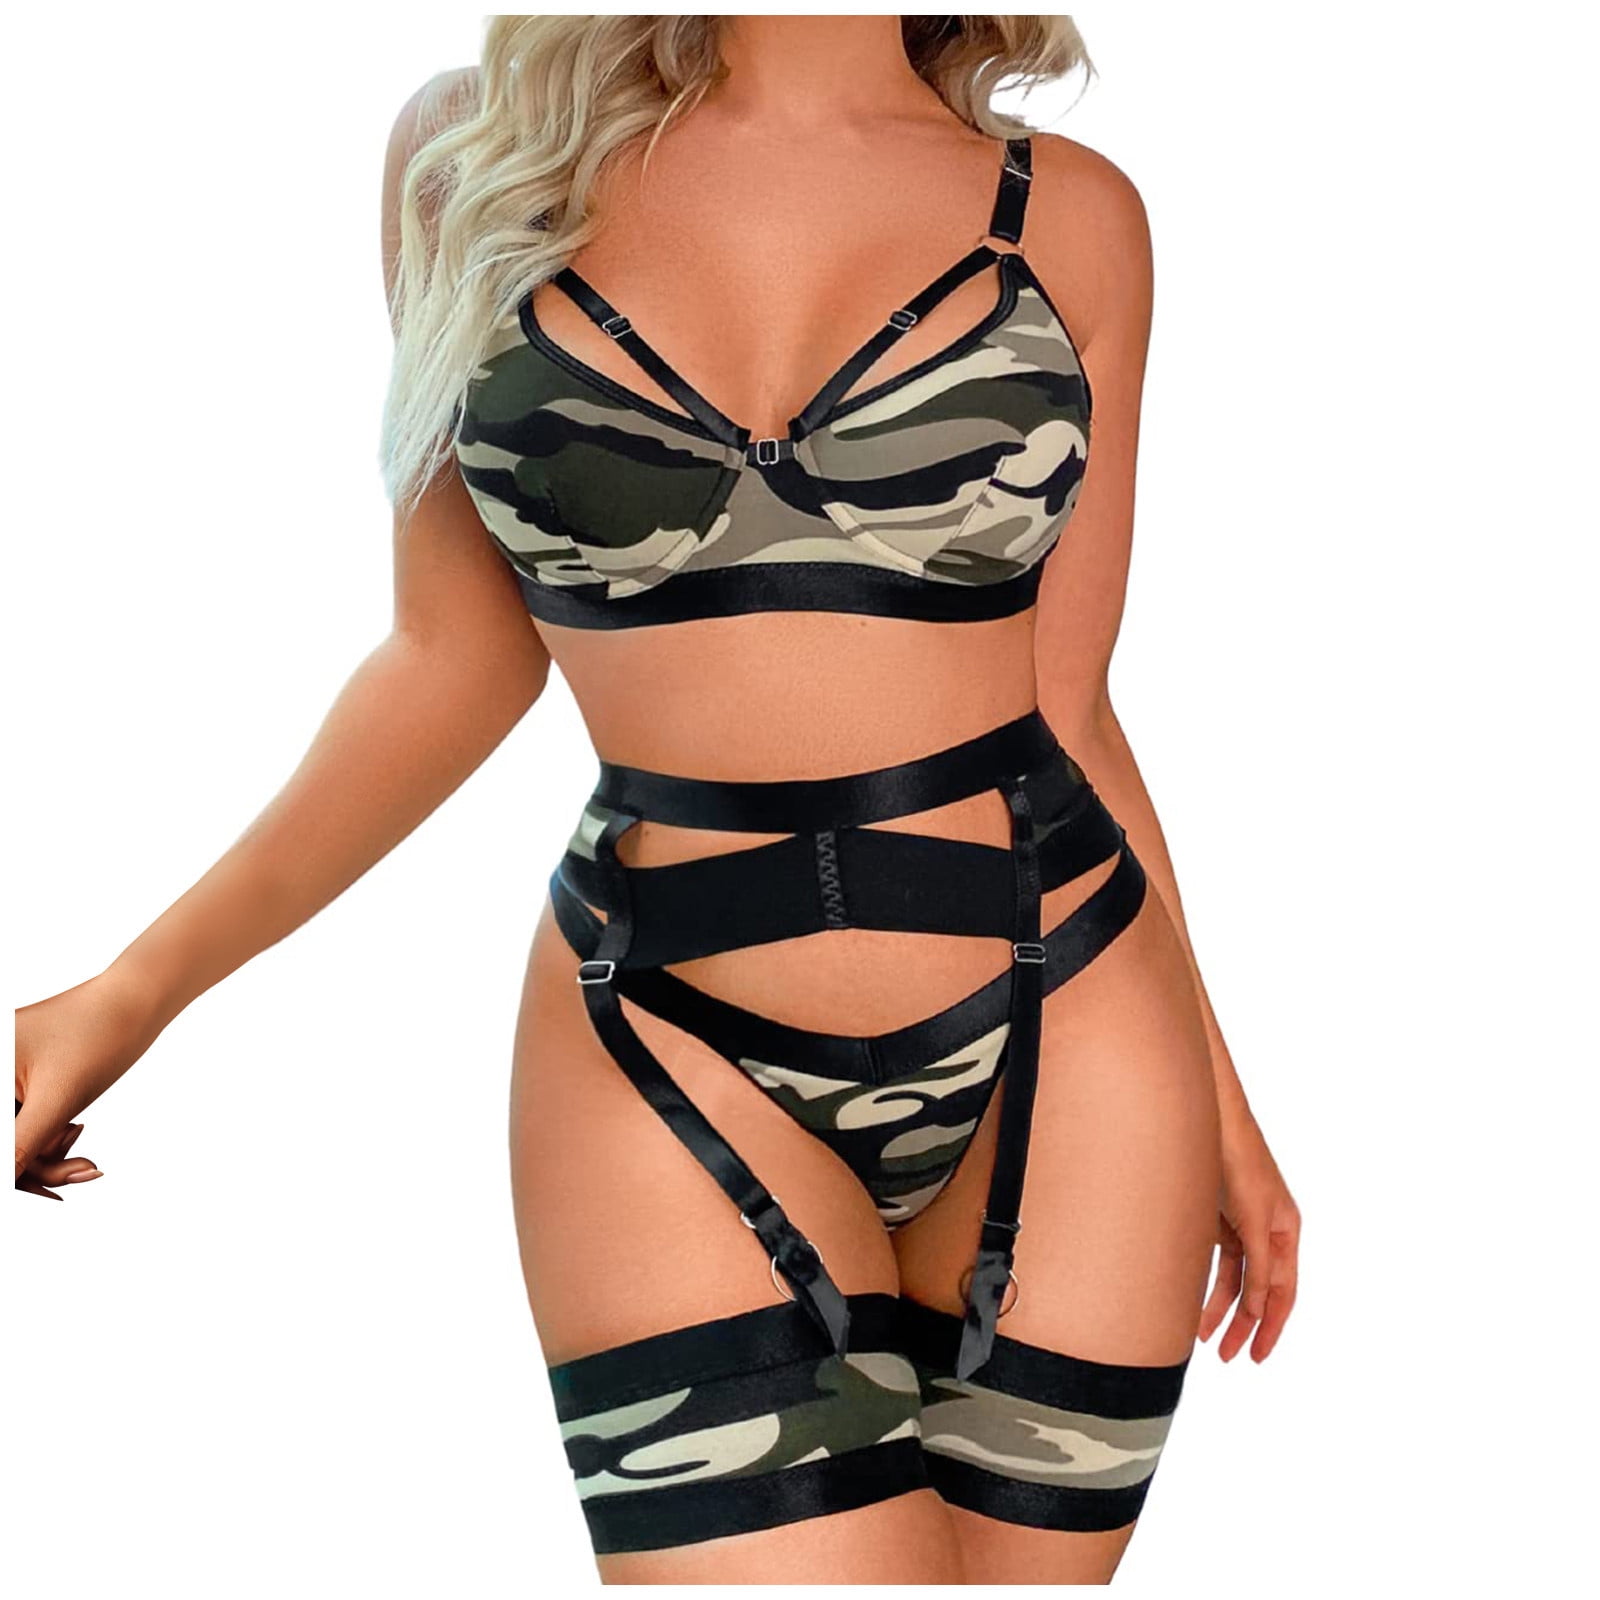 EHTMSAK Sexy Lingerie Set for Women Camouflage Babydoll Strappy Lingerie  with Garter Bra and Panty Set 3 Piece Camouflage S